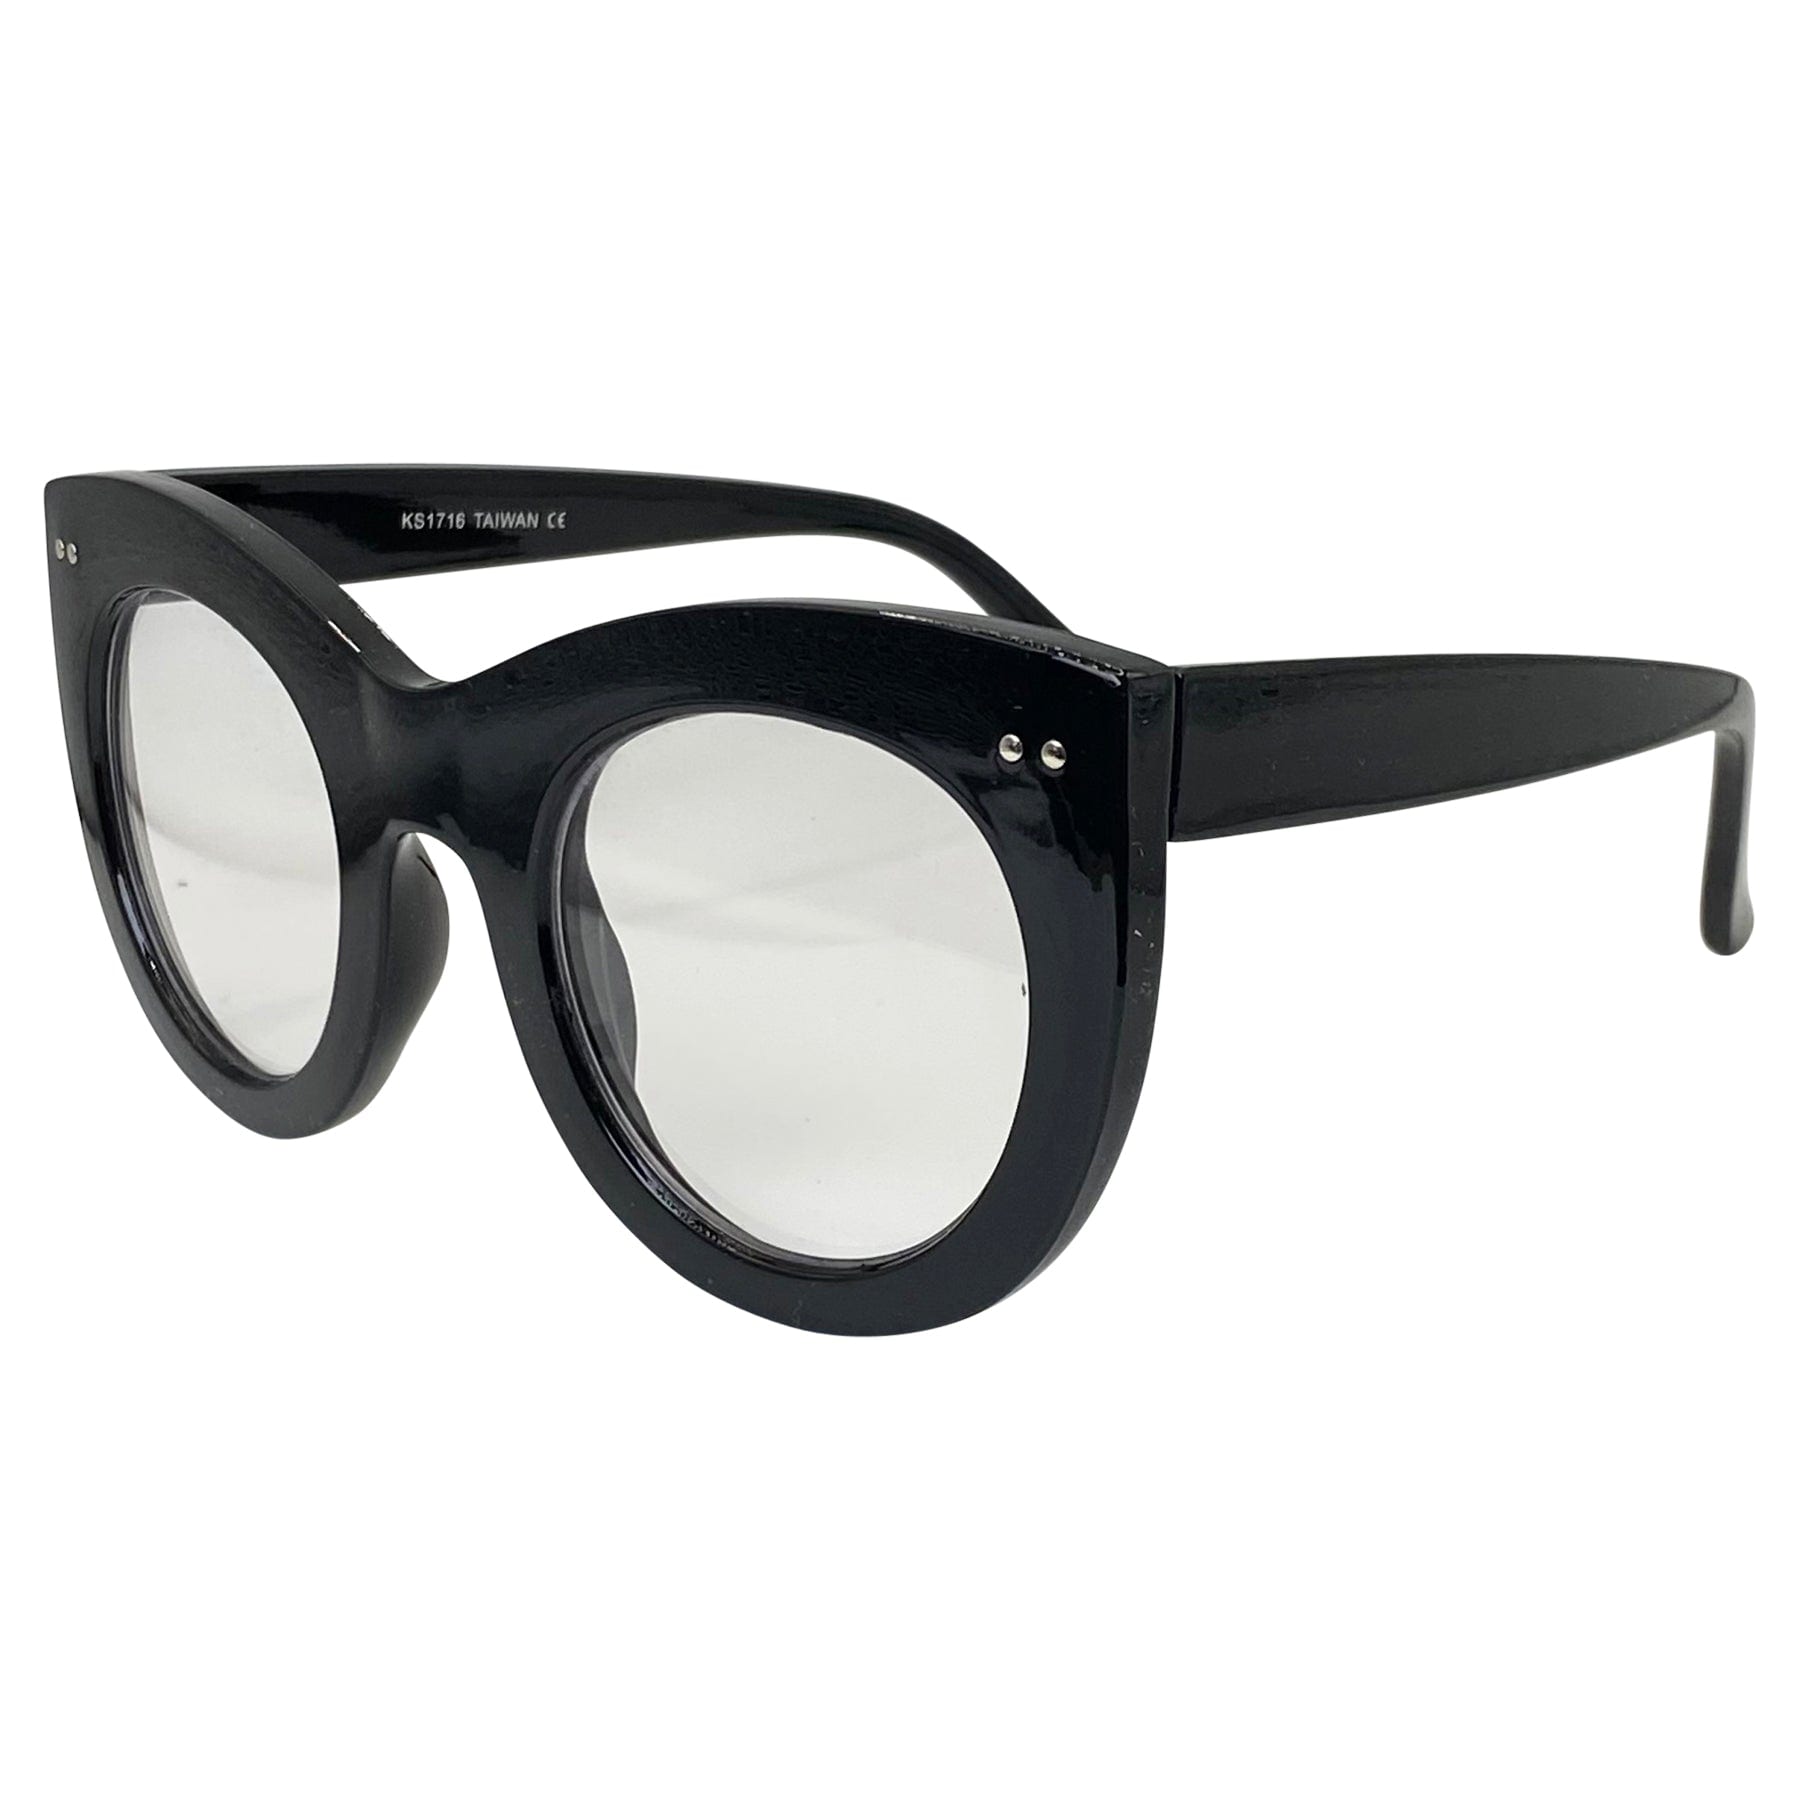 black color glasses with a cat eye rounded frame